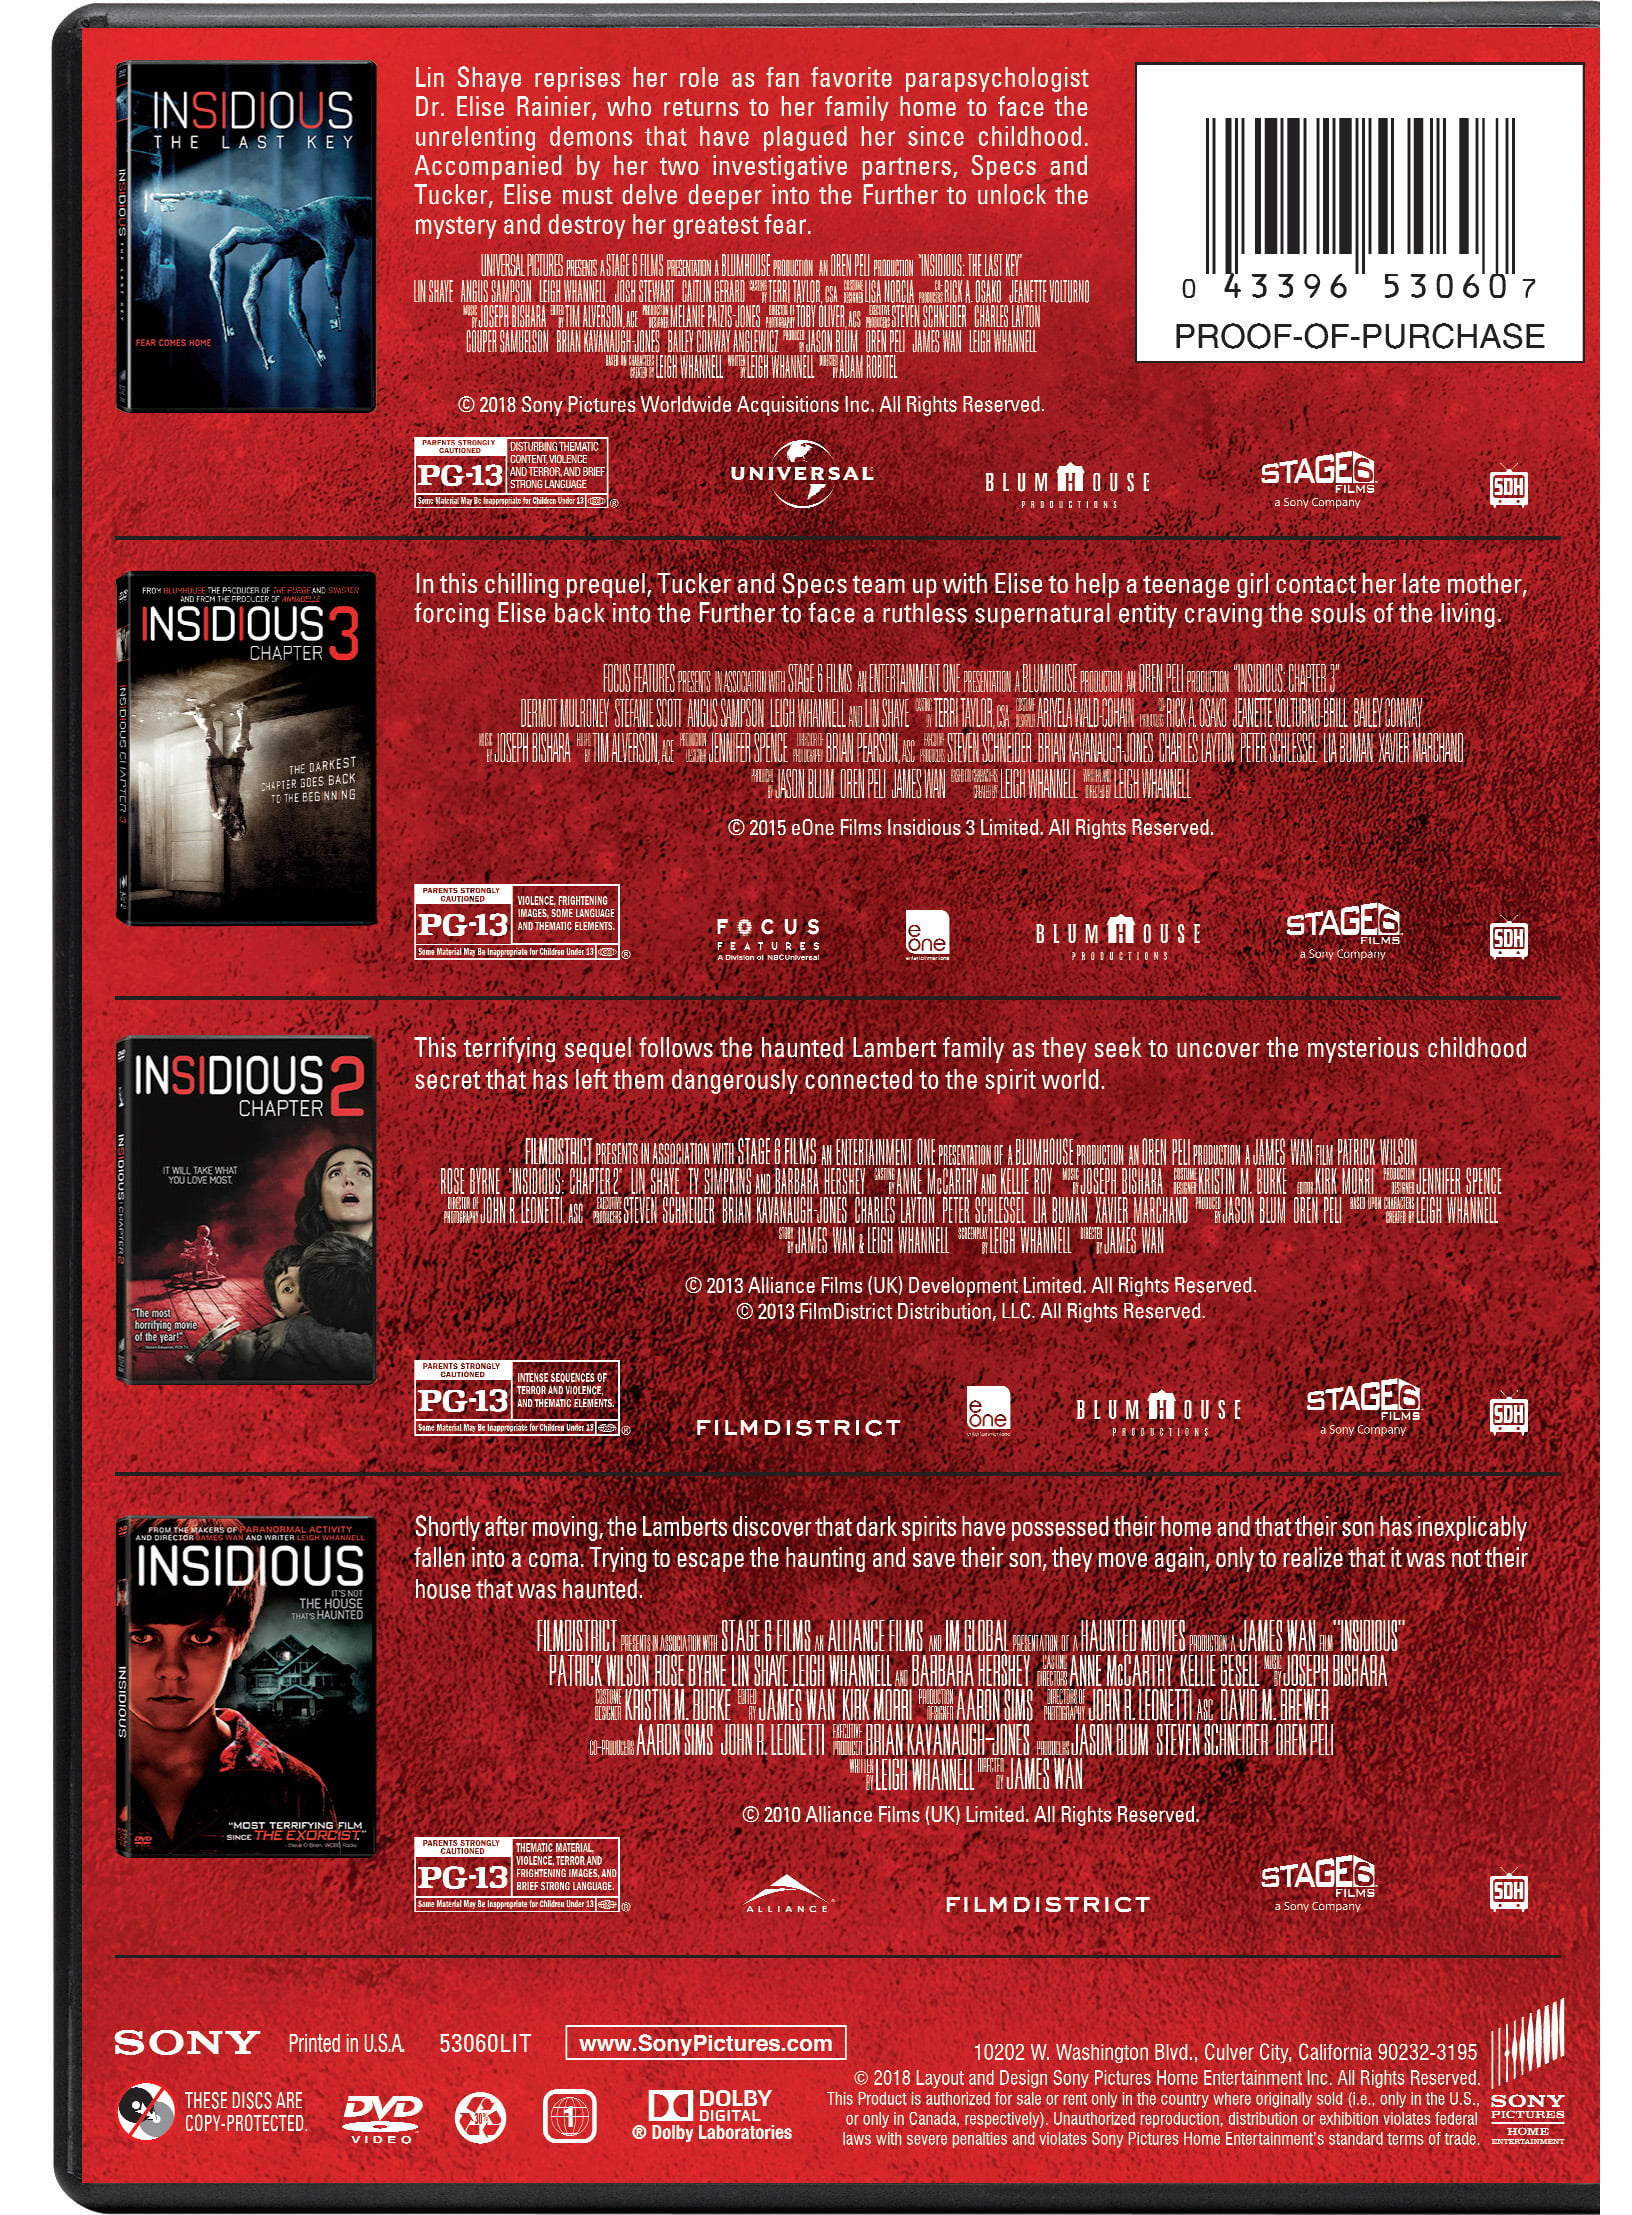 Insidious / Insidious: Chapter 2 / Insidious: Chapter 3 / Insidious: The Last Key [DVD] by Sony Pictures Home Entertainment